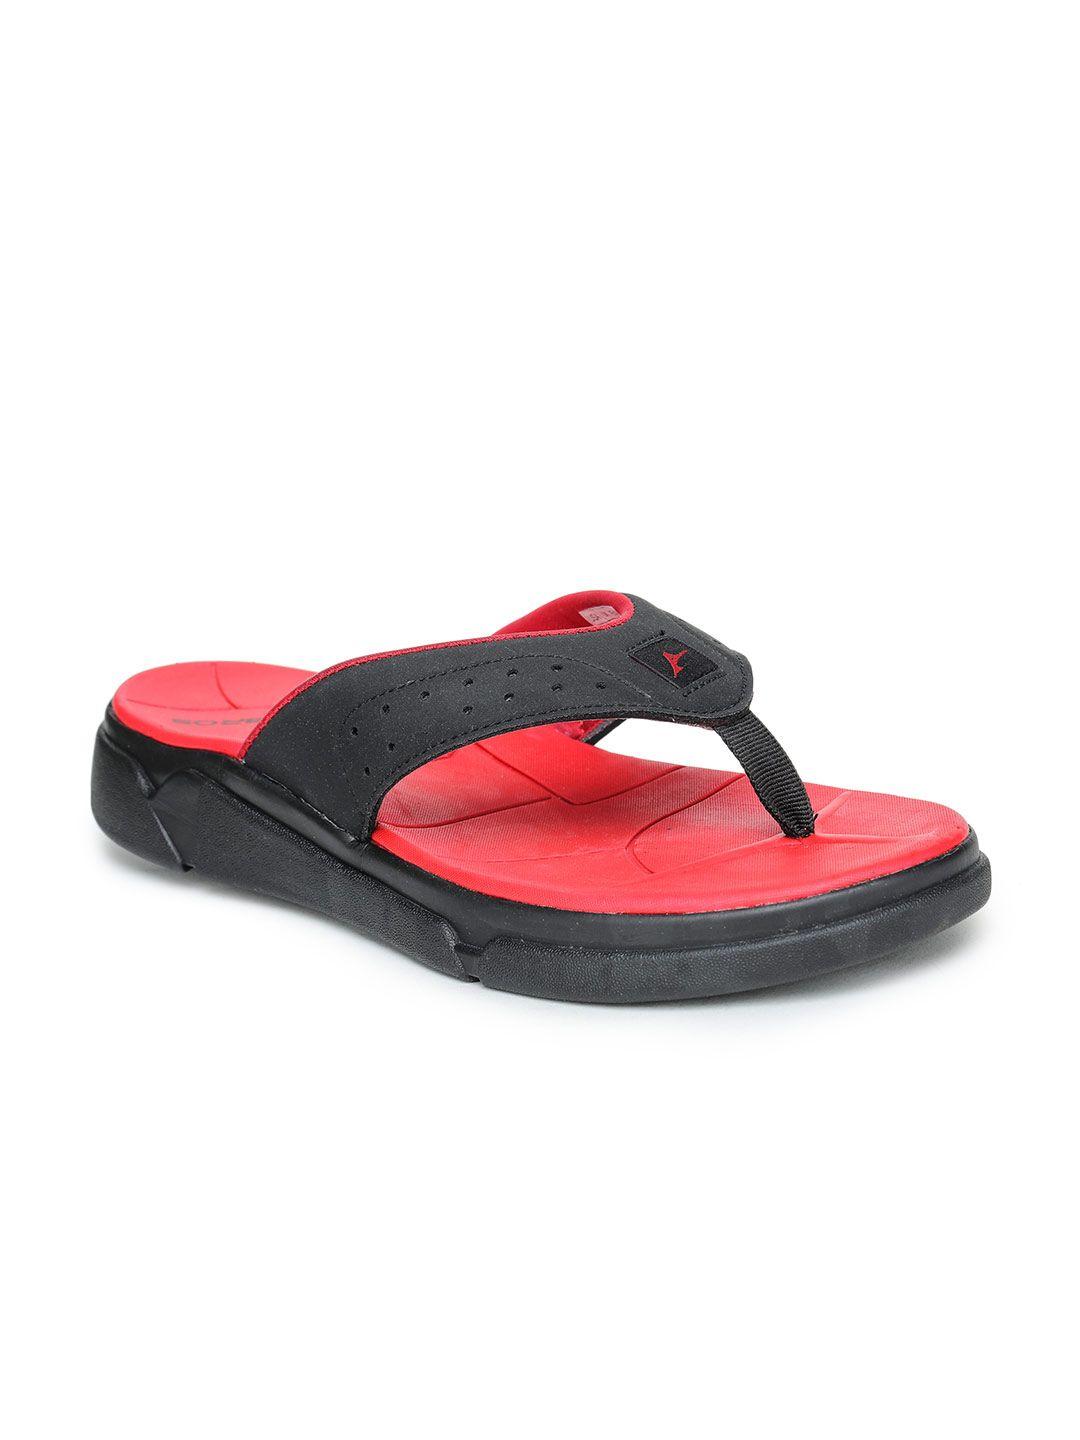 abros men black & red room slippers